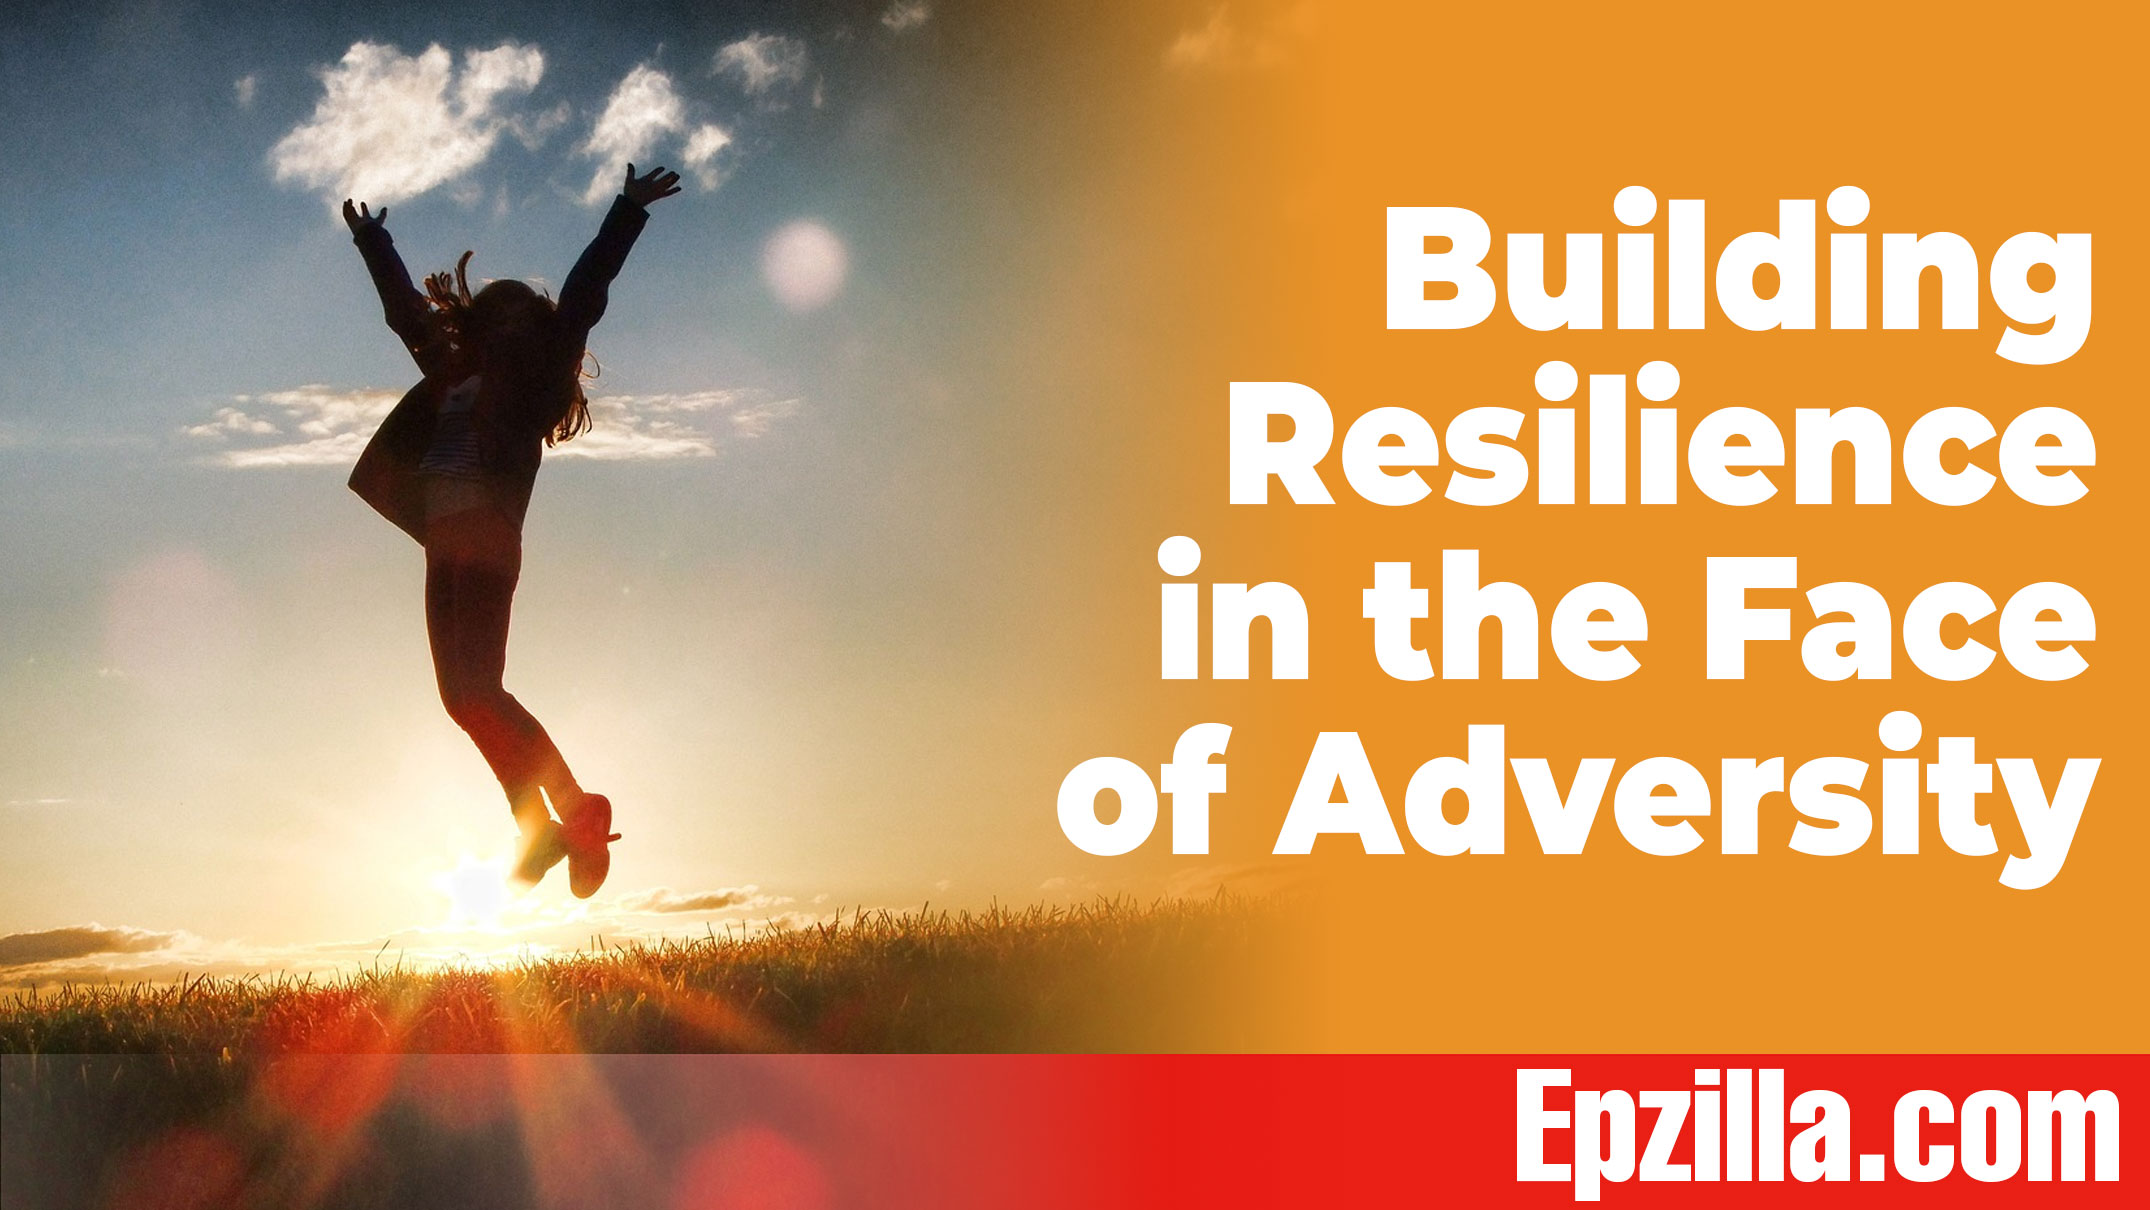 Building Resilience in the Face of Adversity Epzilla.com